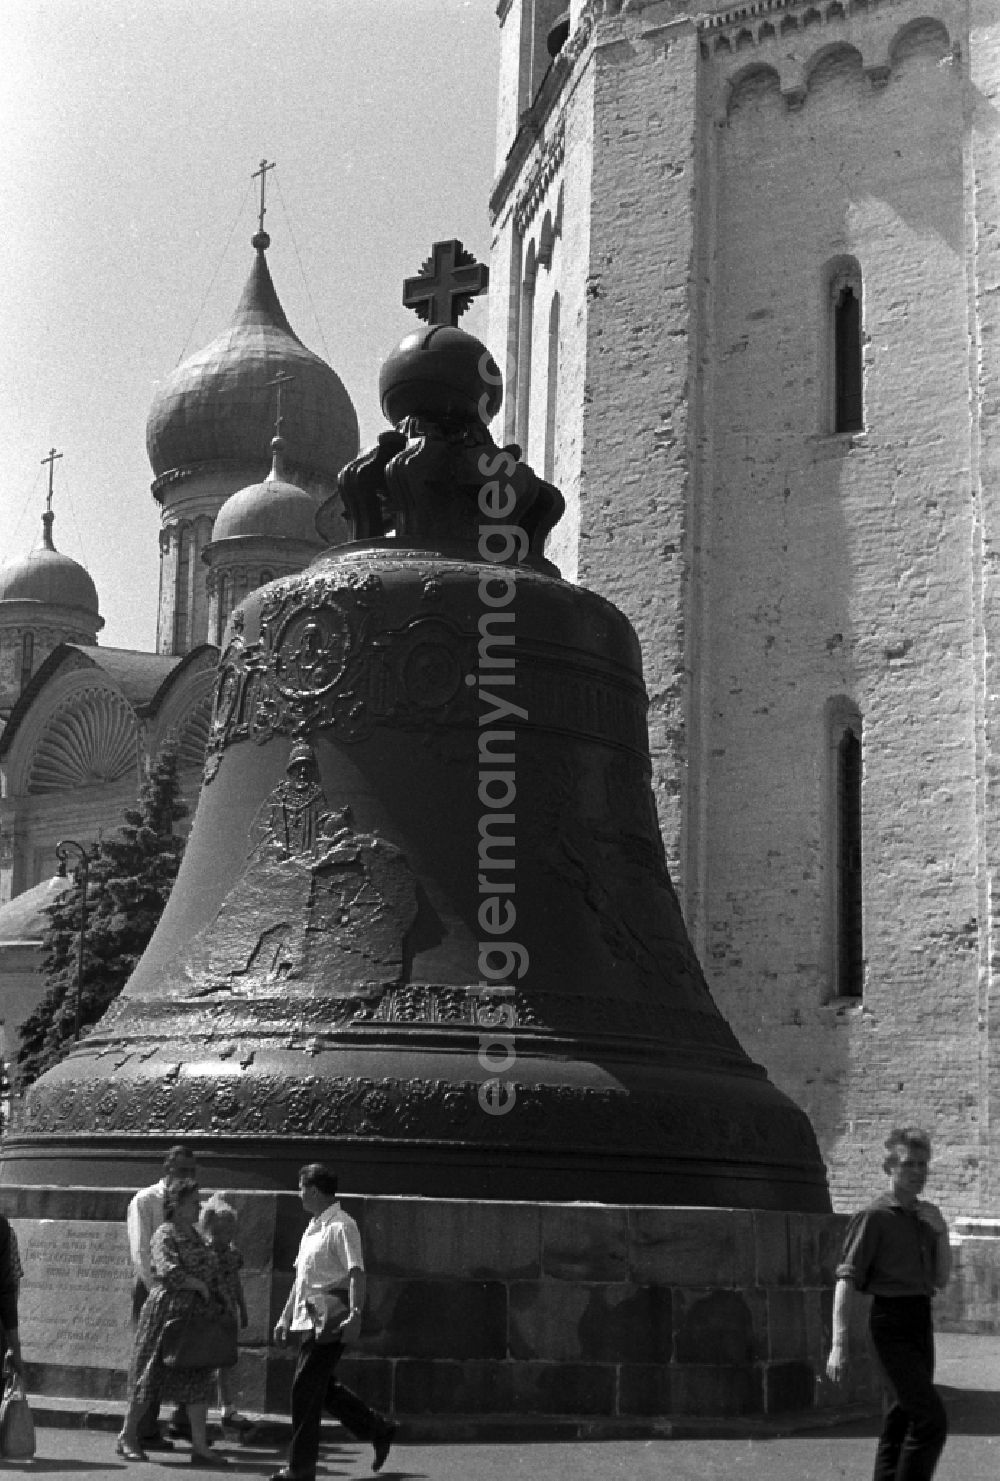 Moskau: The Tsar Bell is an historic bell, which is exhibited in the Moscow Kremlin. It was cast in 1735 and is one of the largest and heaviest bell preserved until today worldwide. The Tsar Bell was never rung, it stands as a landmark since 1836 on an octagonal base and is one of the main tourist attractions within the Kremlin. In the background the Archangel Michael Cathedral